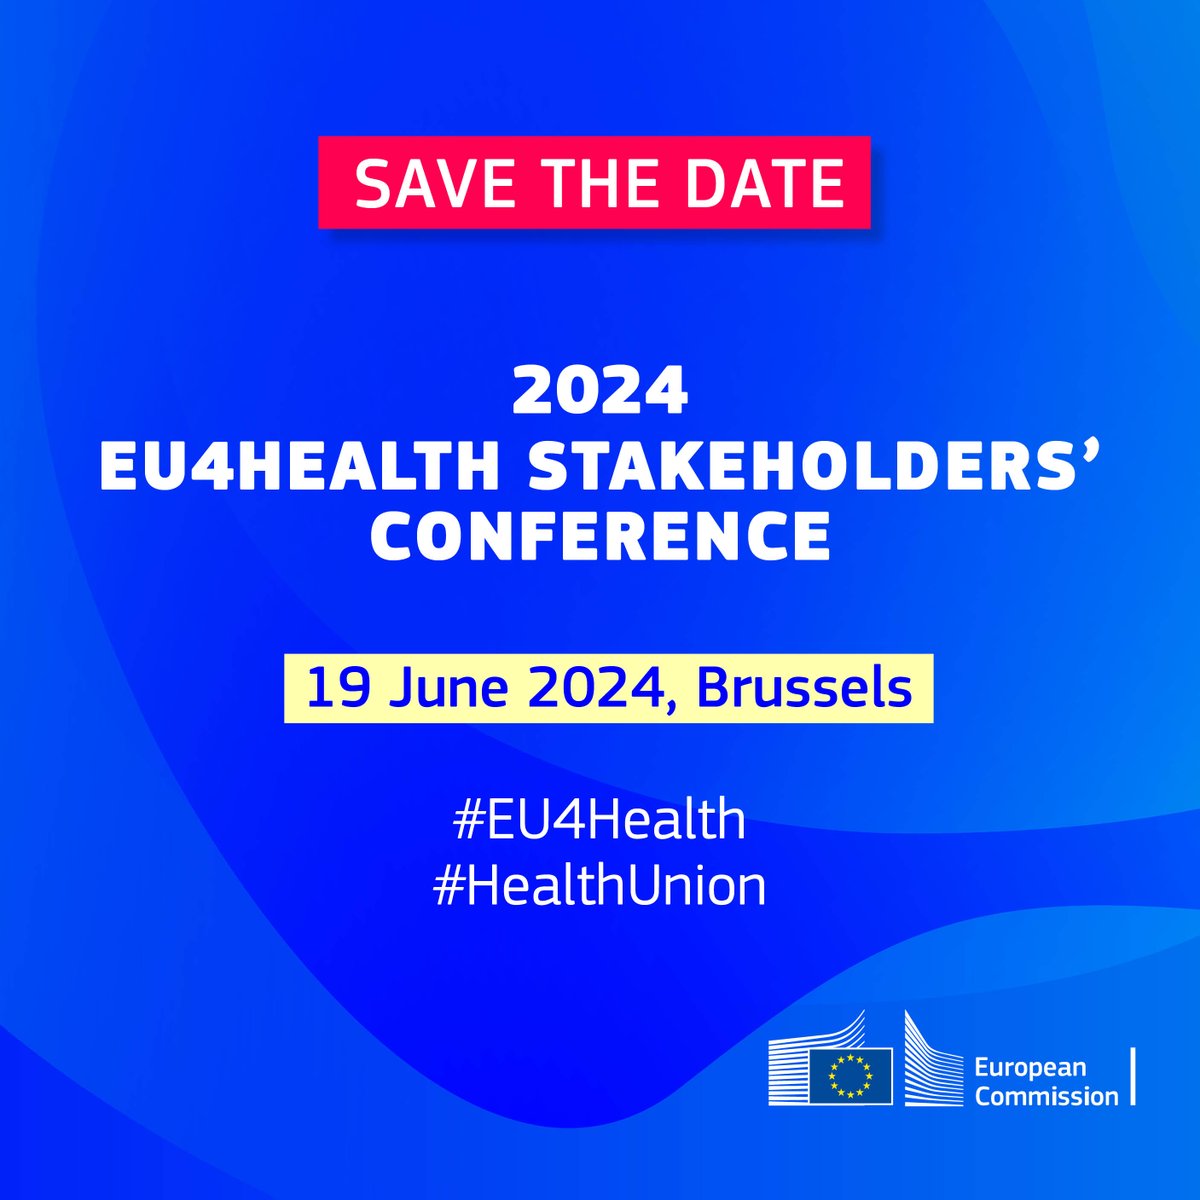 Save the date & join us on 19 June at our #EU4Health Stakeholders' Conference with sessions on: ➡️Health promotion & disease prevention ➡️Strong health systems ➡️Crisis preparedness ➡️Cancer ➡️Digital health See more information here👉 europa.eu/!hxkMmr #HealthUnion